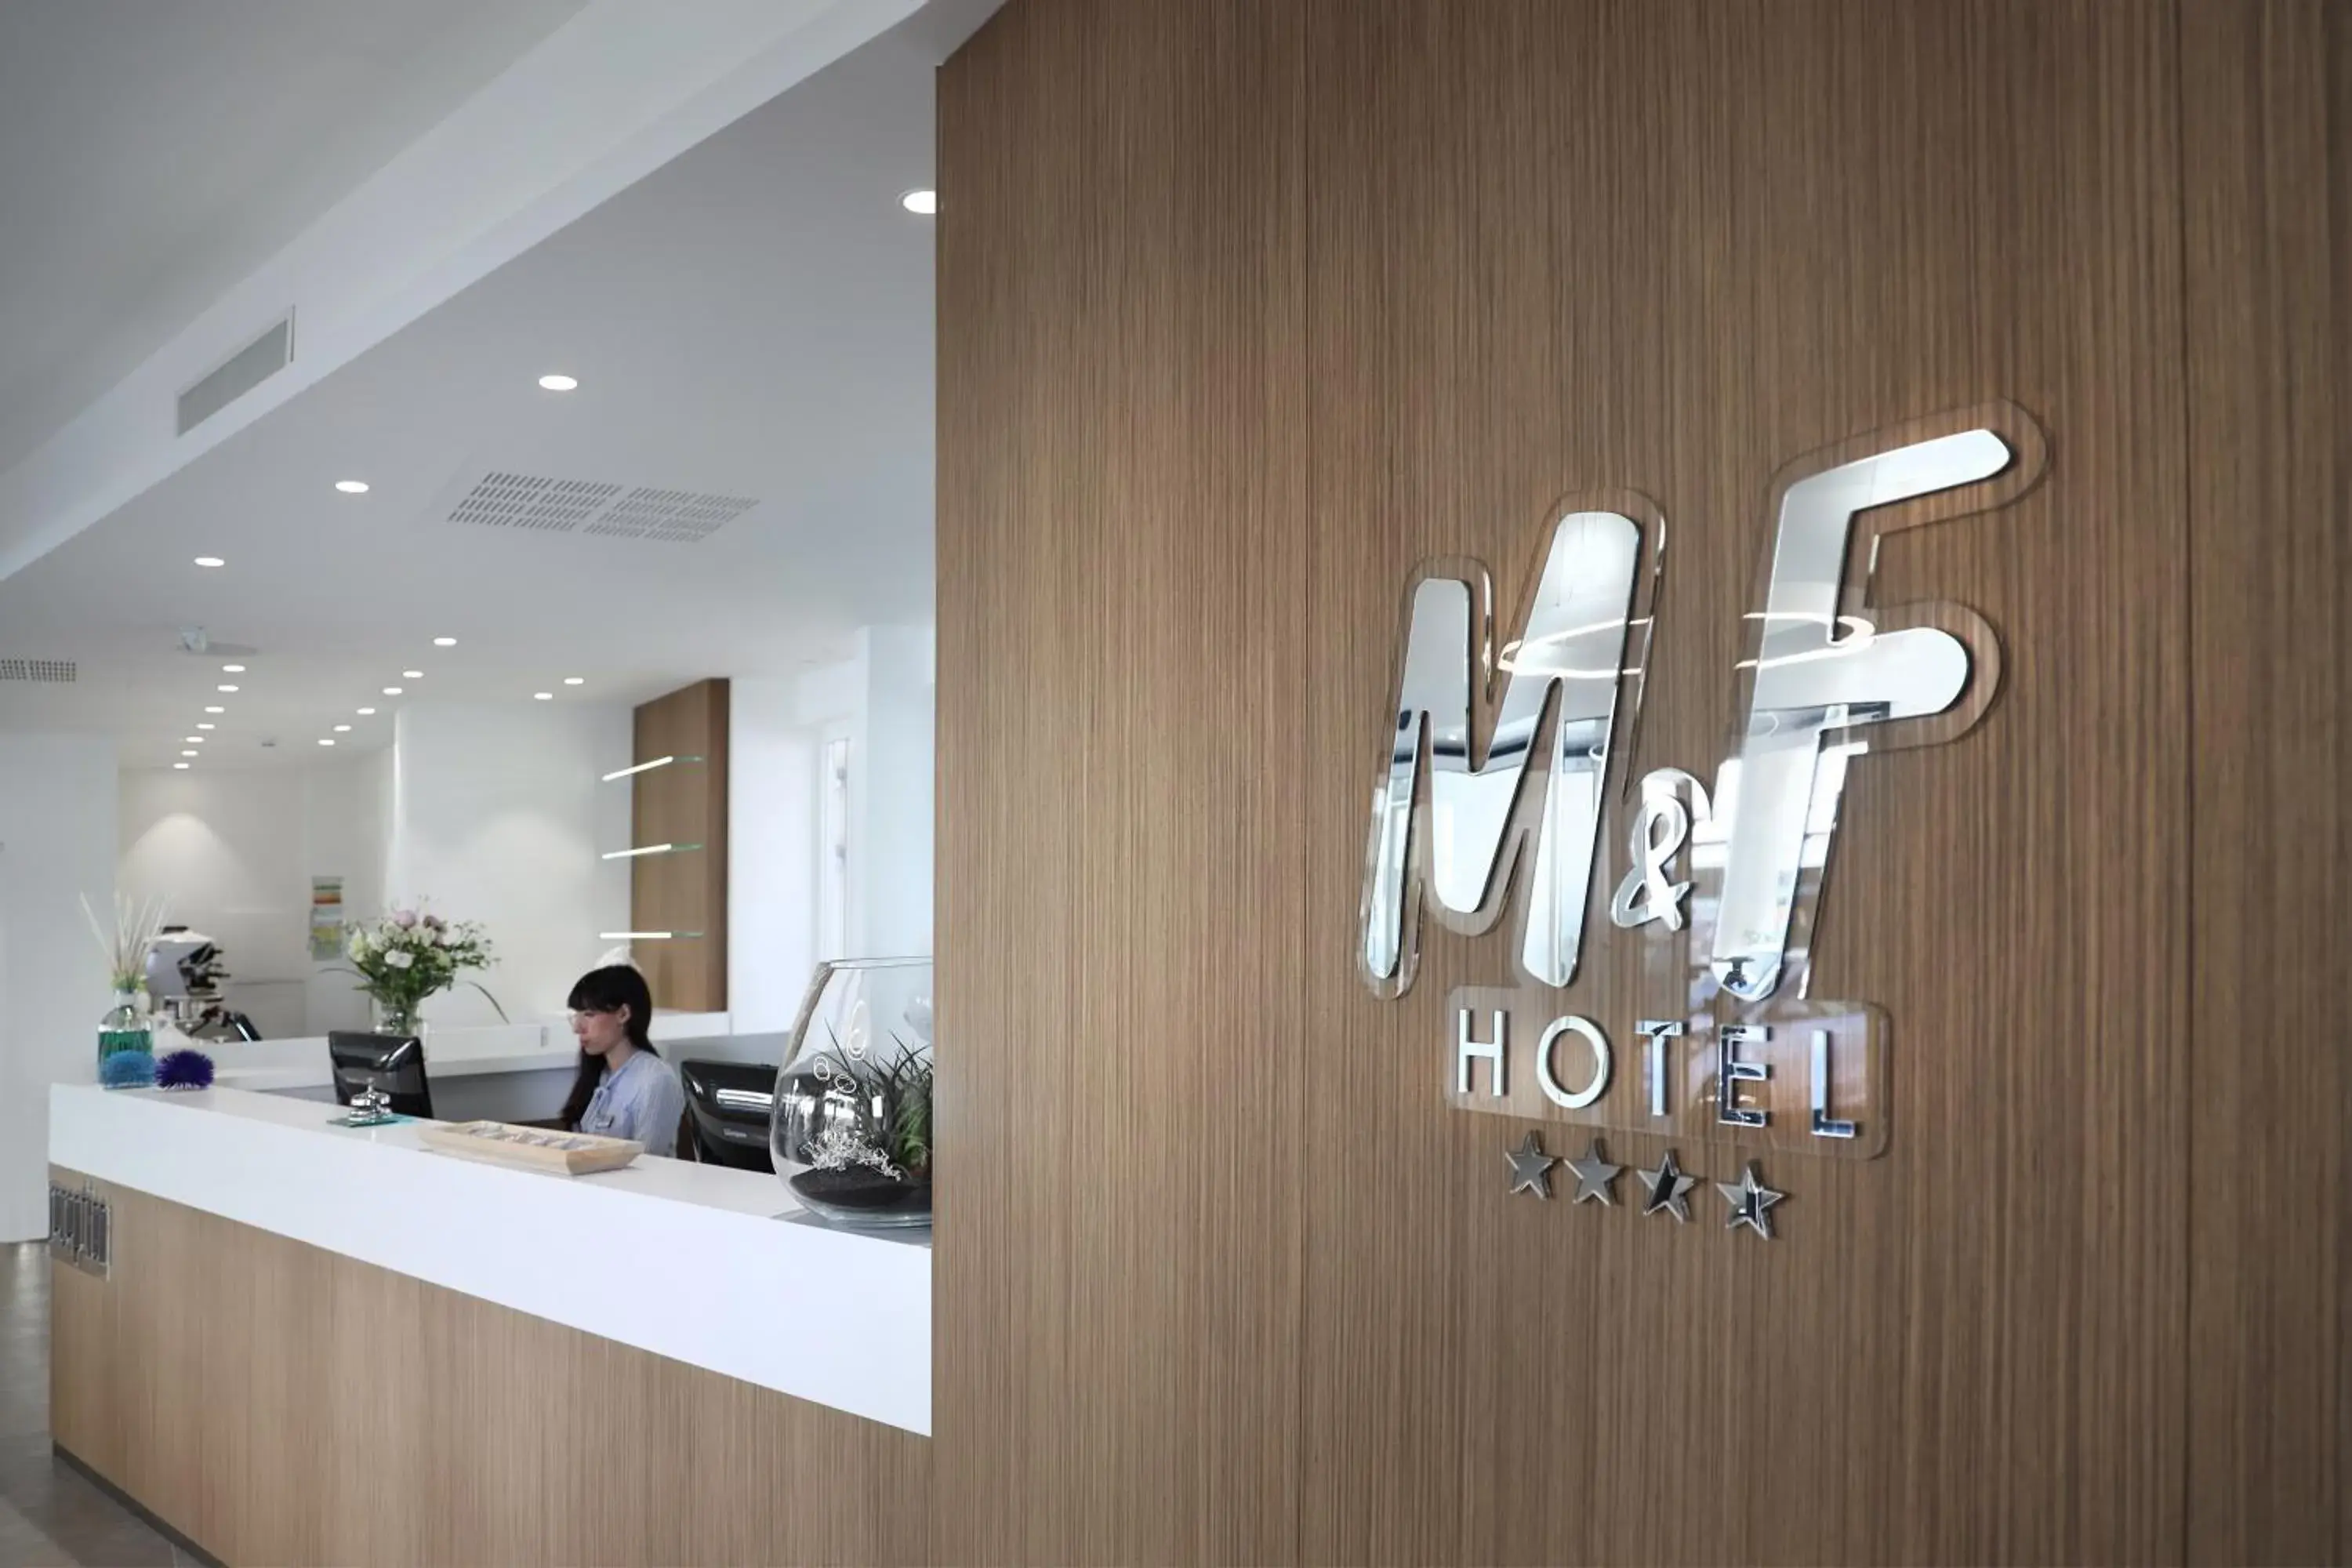 Property logo or sign in M&F Hotel